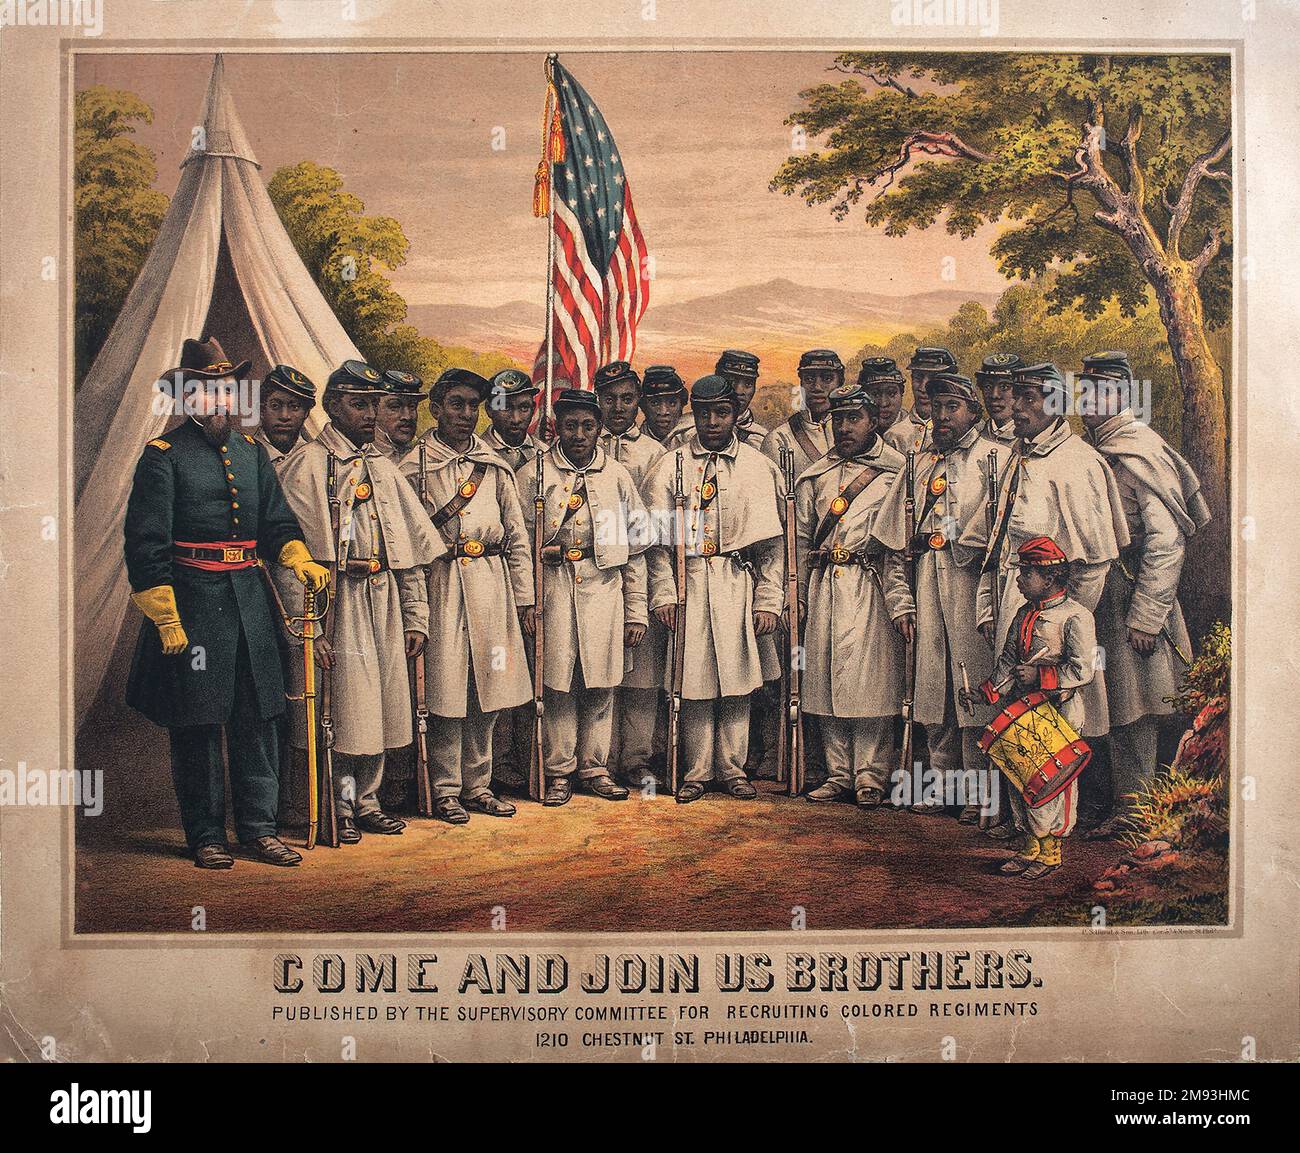 A recruitment poster for the United States Colored Troops (USCT) with the slogan Come and Join Us Brothers, by the Supervisory Committee For Recruiting Colored Regiments Stock Photo